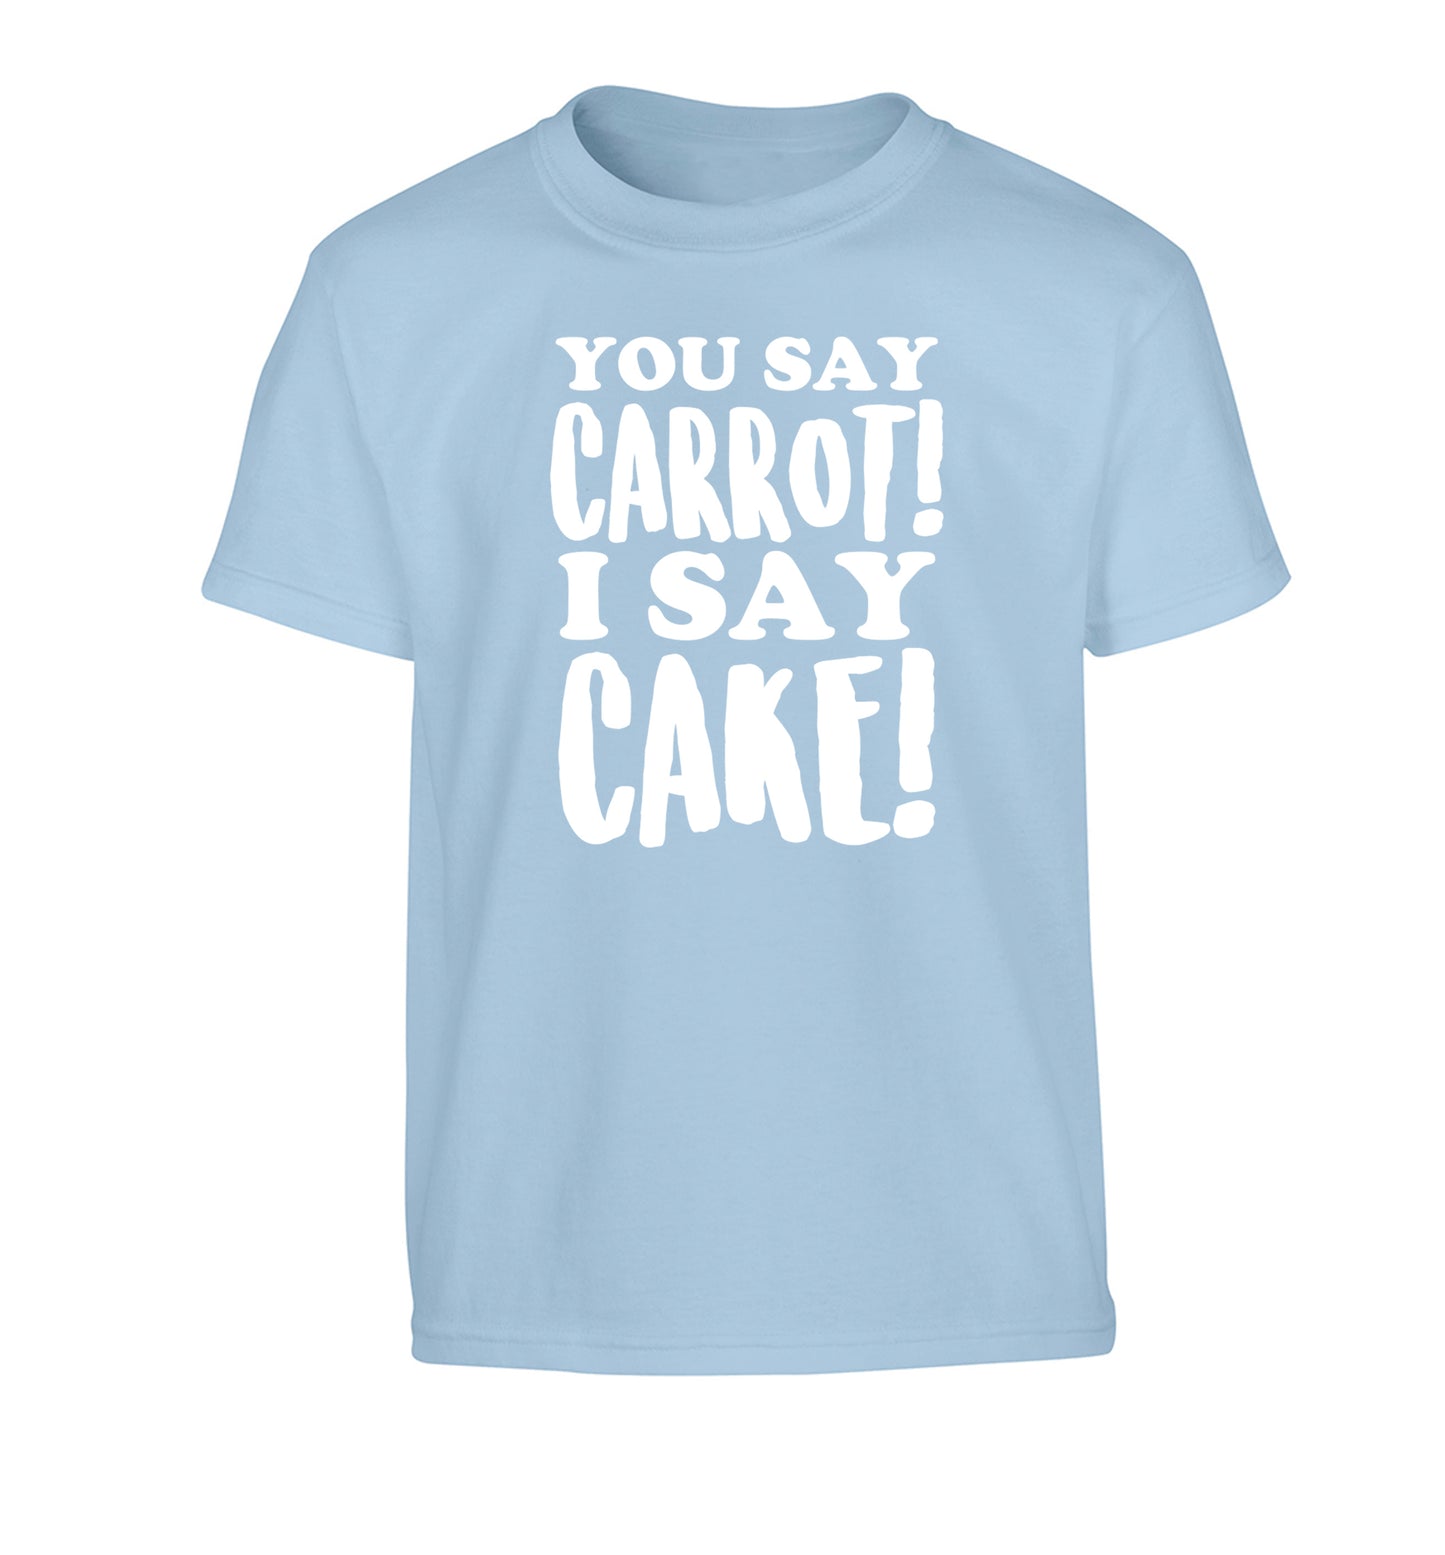 You say carrot I say cake! Children's light blue Tshirt 12-14 Years